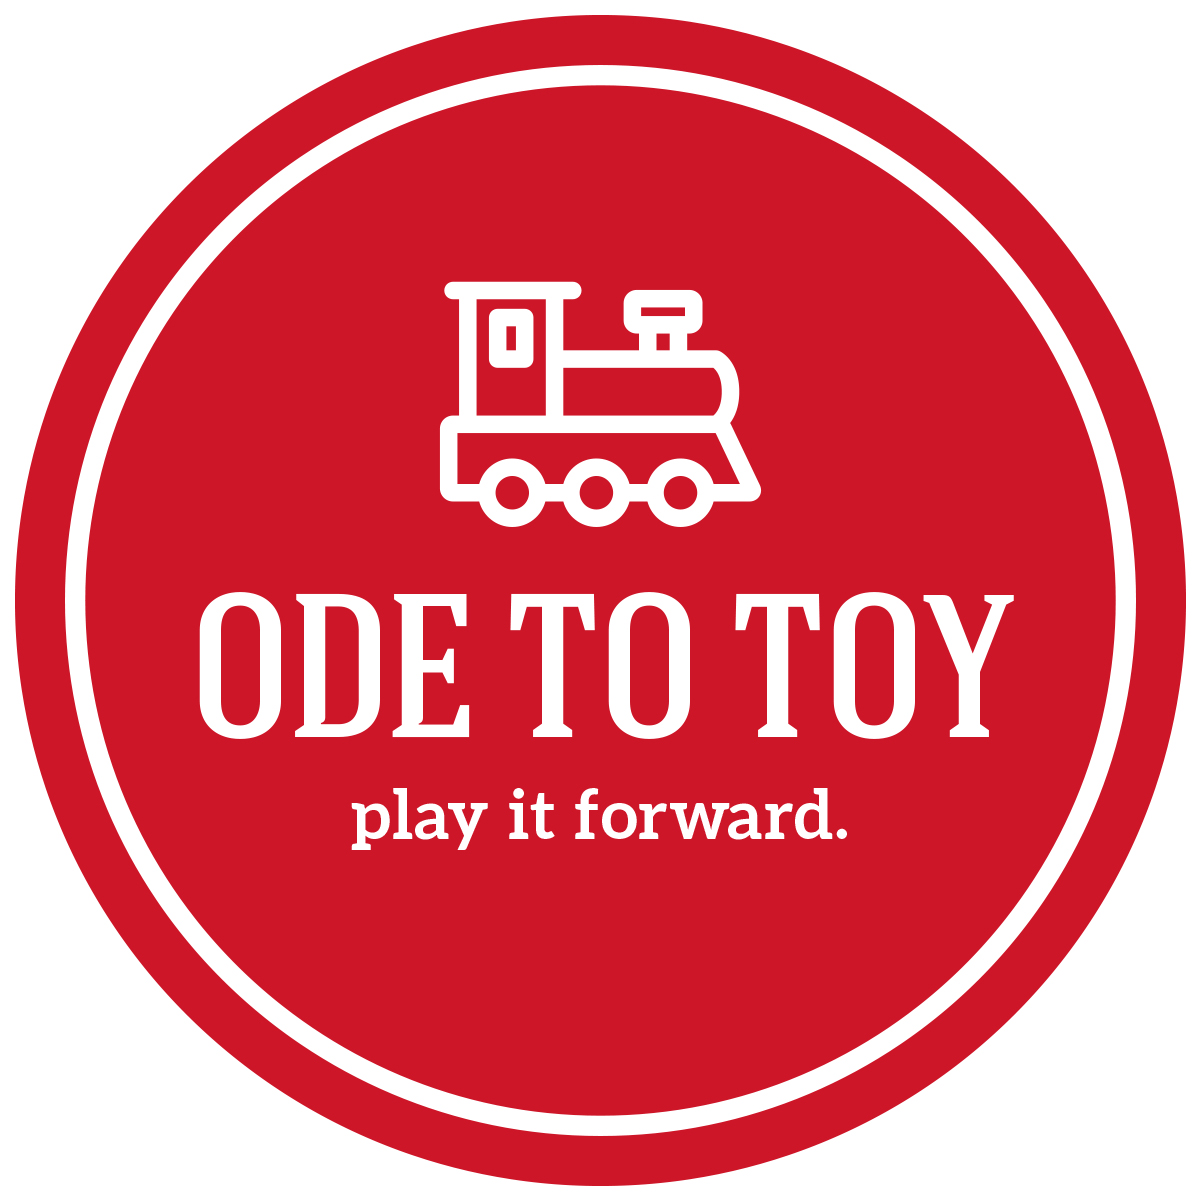 Ode to Toy